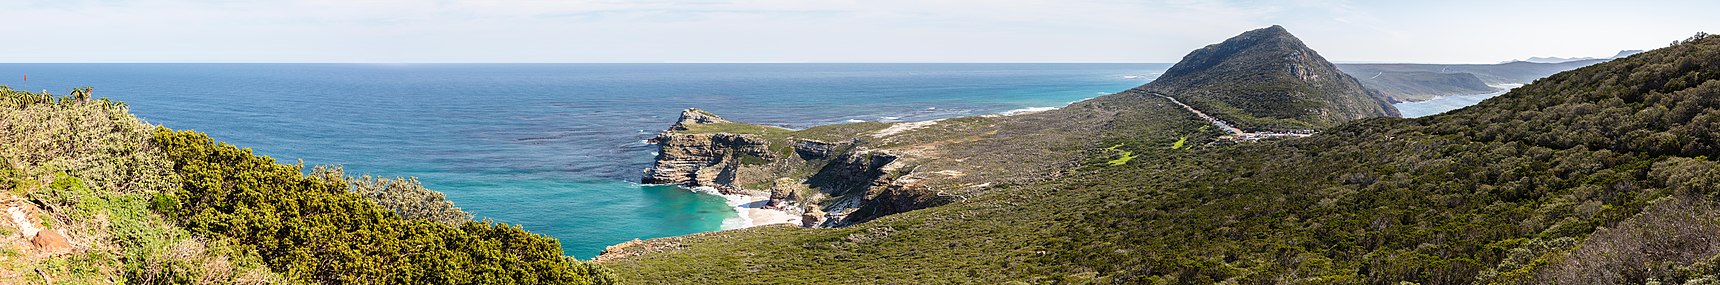 Cape of Good Hope panorama – the cape at centre, and the conical Vasco da Gama Peak (266 metres) at right